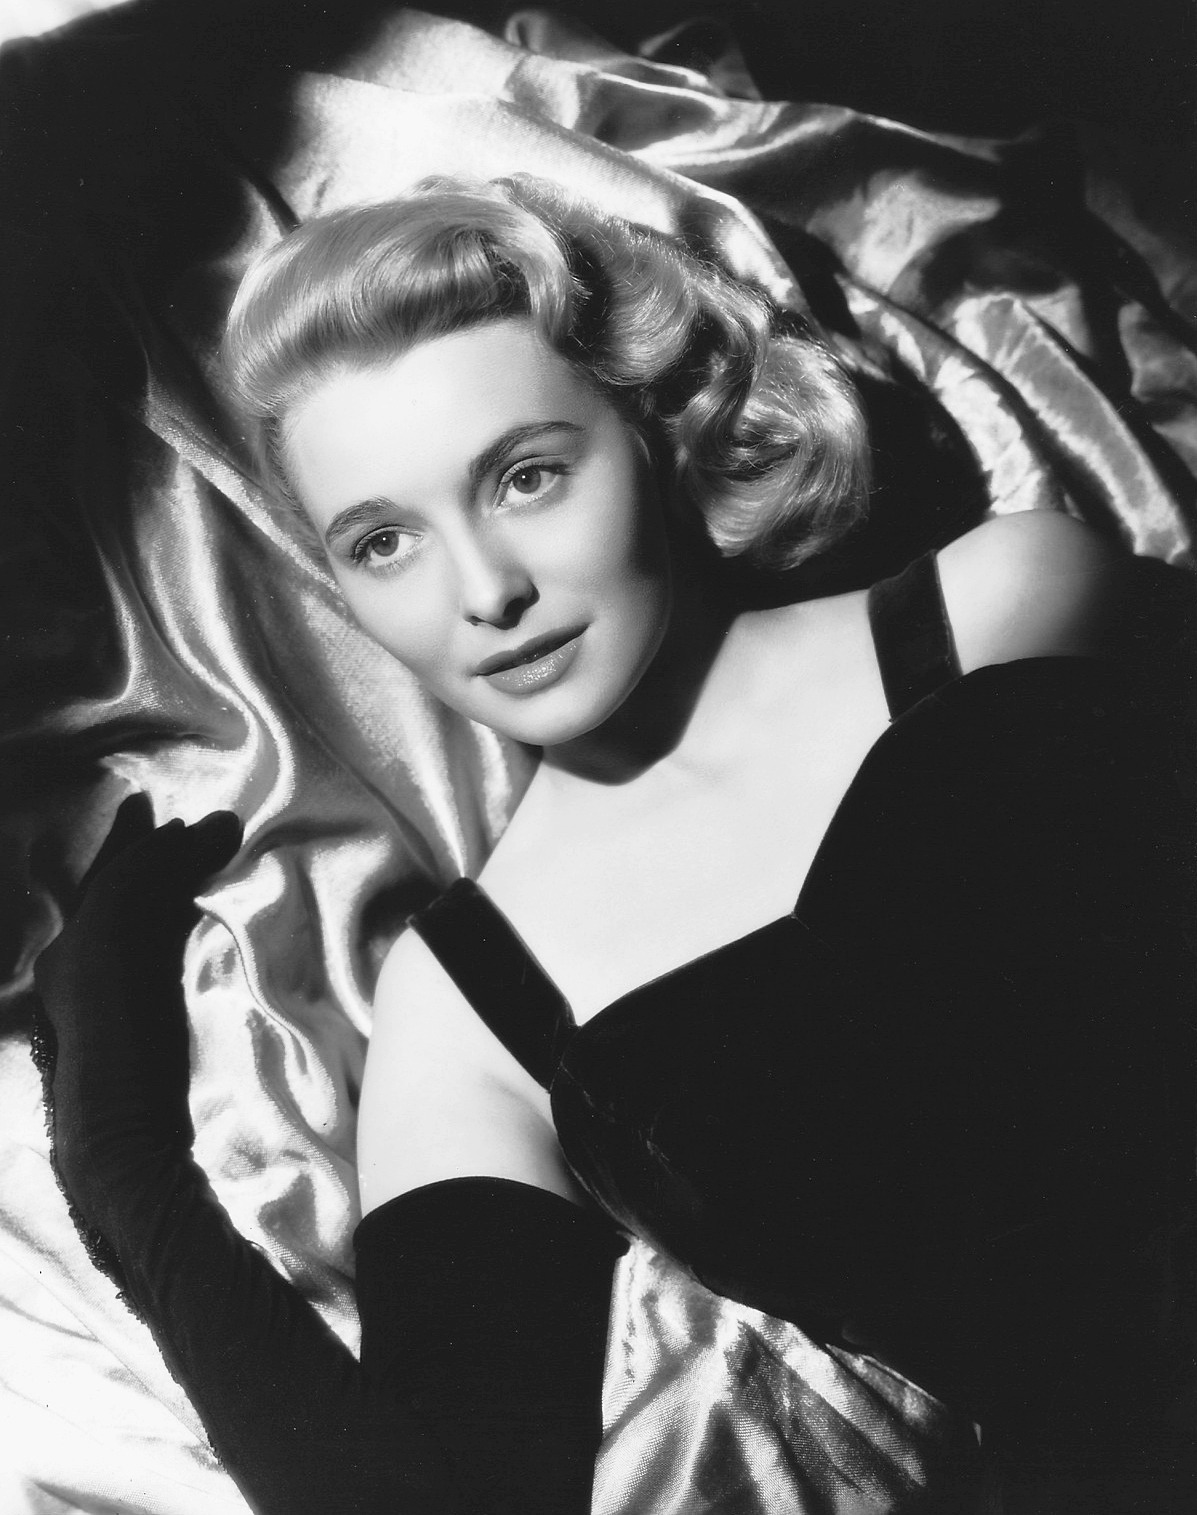 Photo of Patricia Neal by George Hurrell, 1949
“I may be a dumb blonde, but I’m not that blonde.”